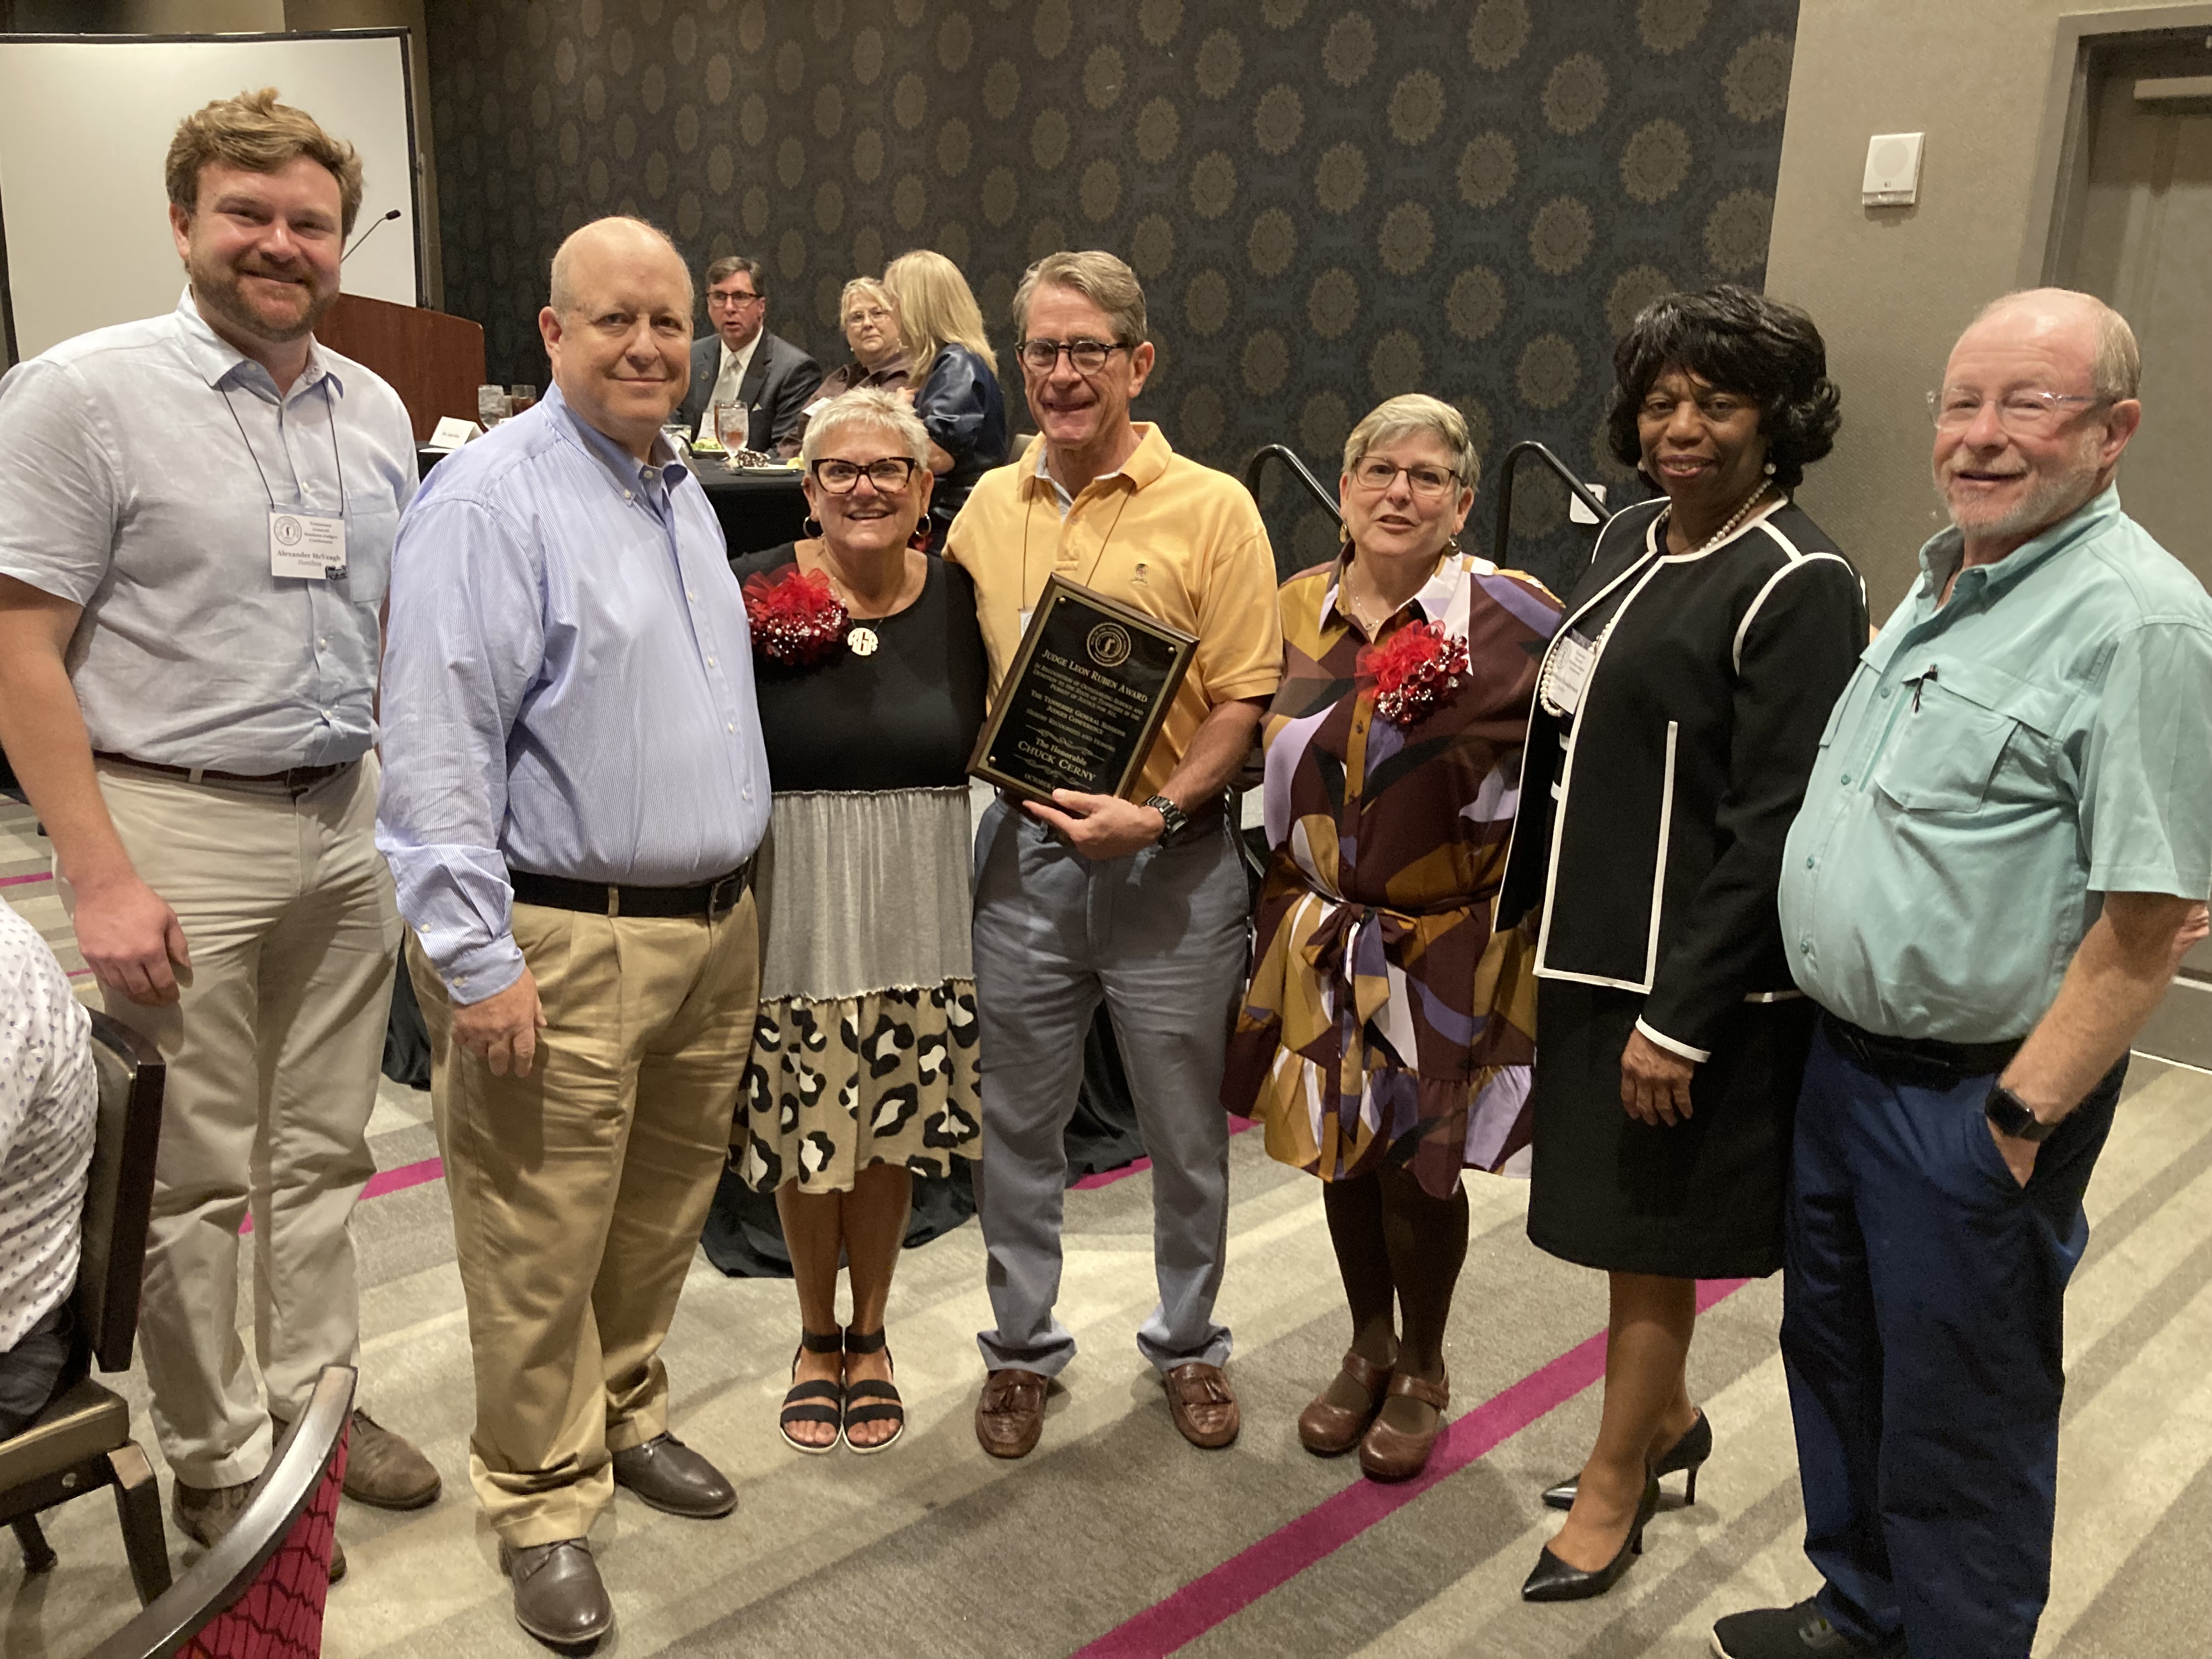 Judge Chuck Cerny surrounded by the daughters and sons-in-law of the late Judge Leon Ruben; Hamilton County General Sessions Court Judge Alex McVeagh; and outgoing General Sessions Judges Conference President and Shelby County General Sessions Judge Deborah Means Henderson.